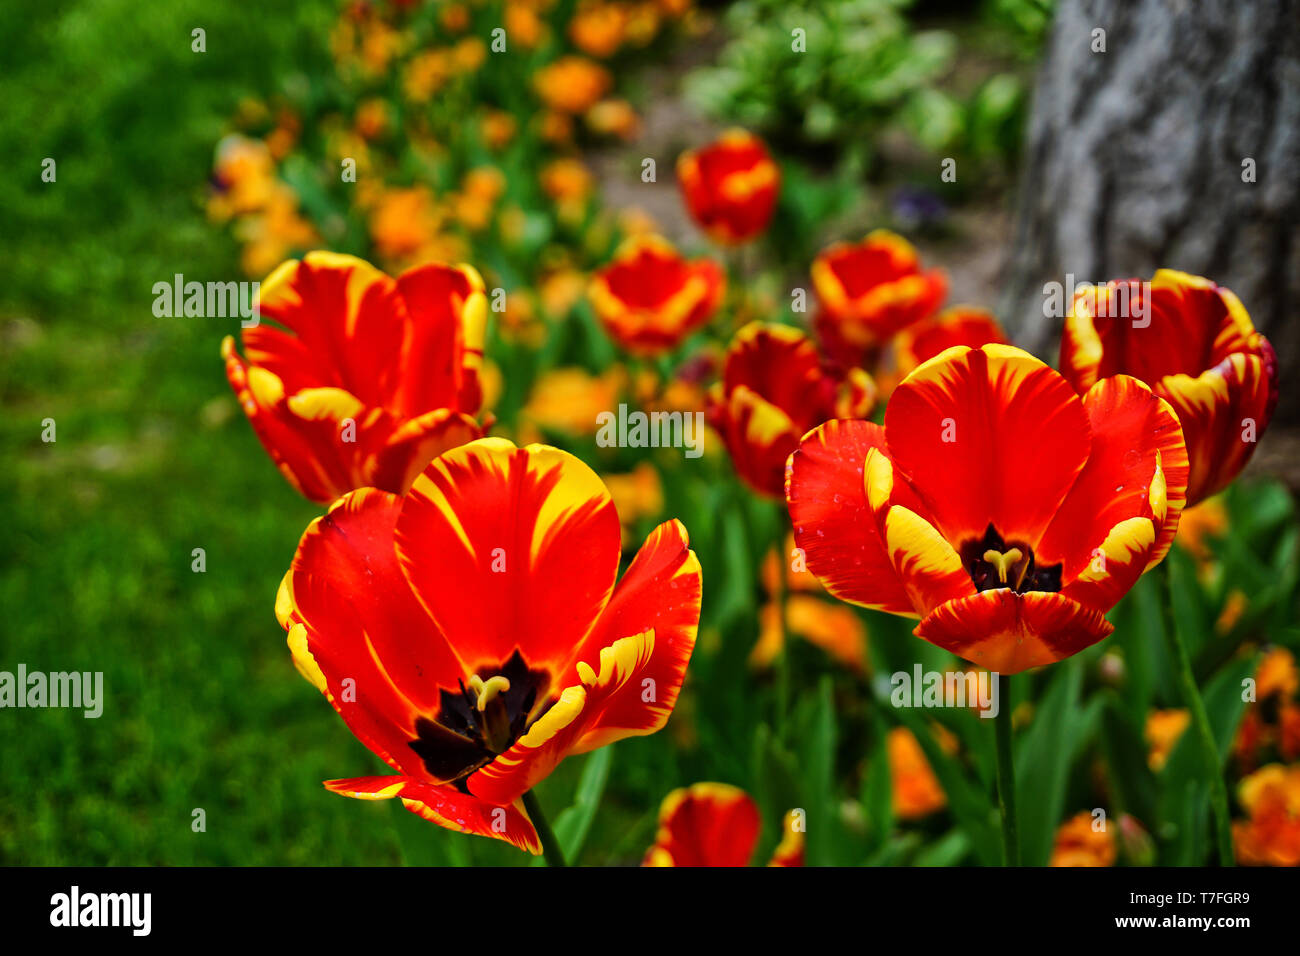 Red tulips garden close up view Stock Photo